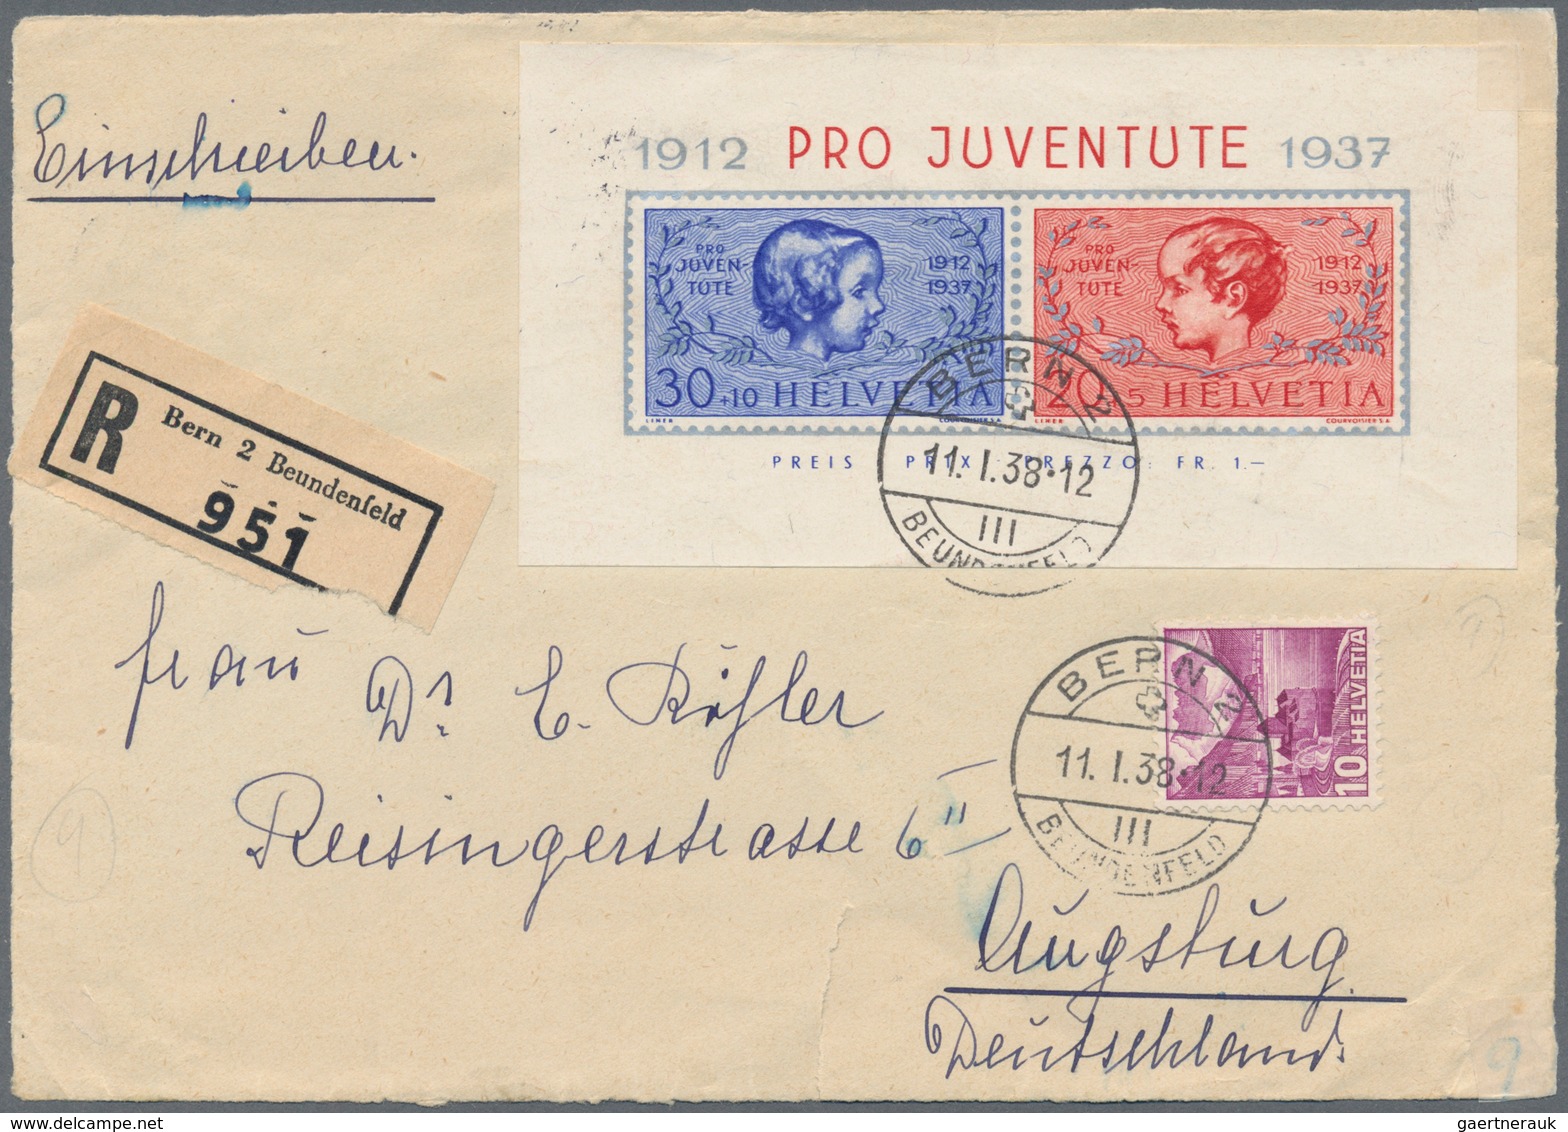 Europa: 1865/1980 (ca.), holding of several hundred covers/cards comprising Monaco, Norway, San Mari